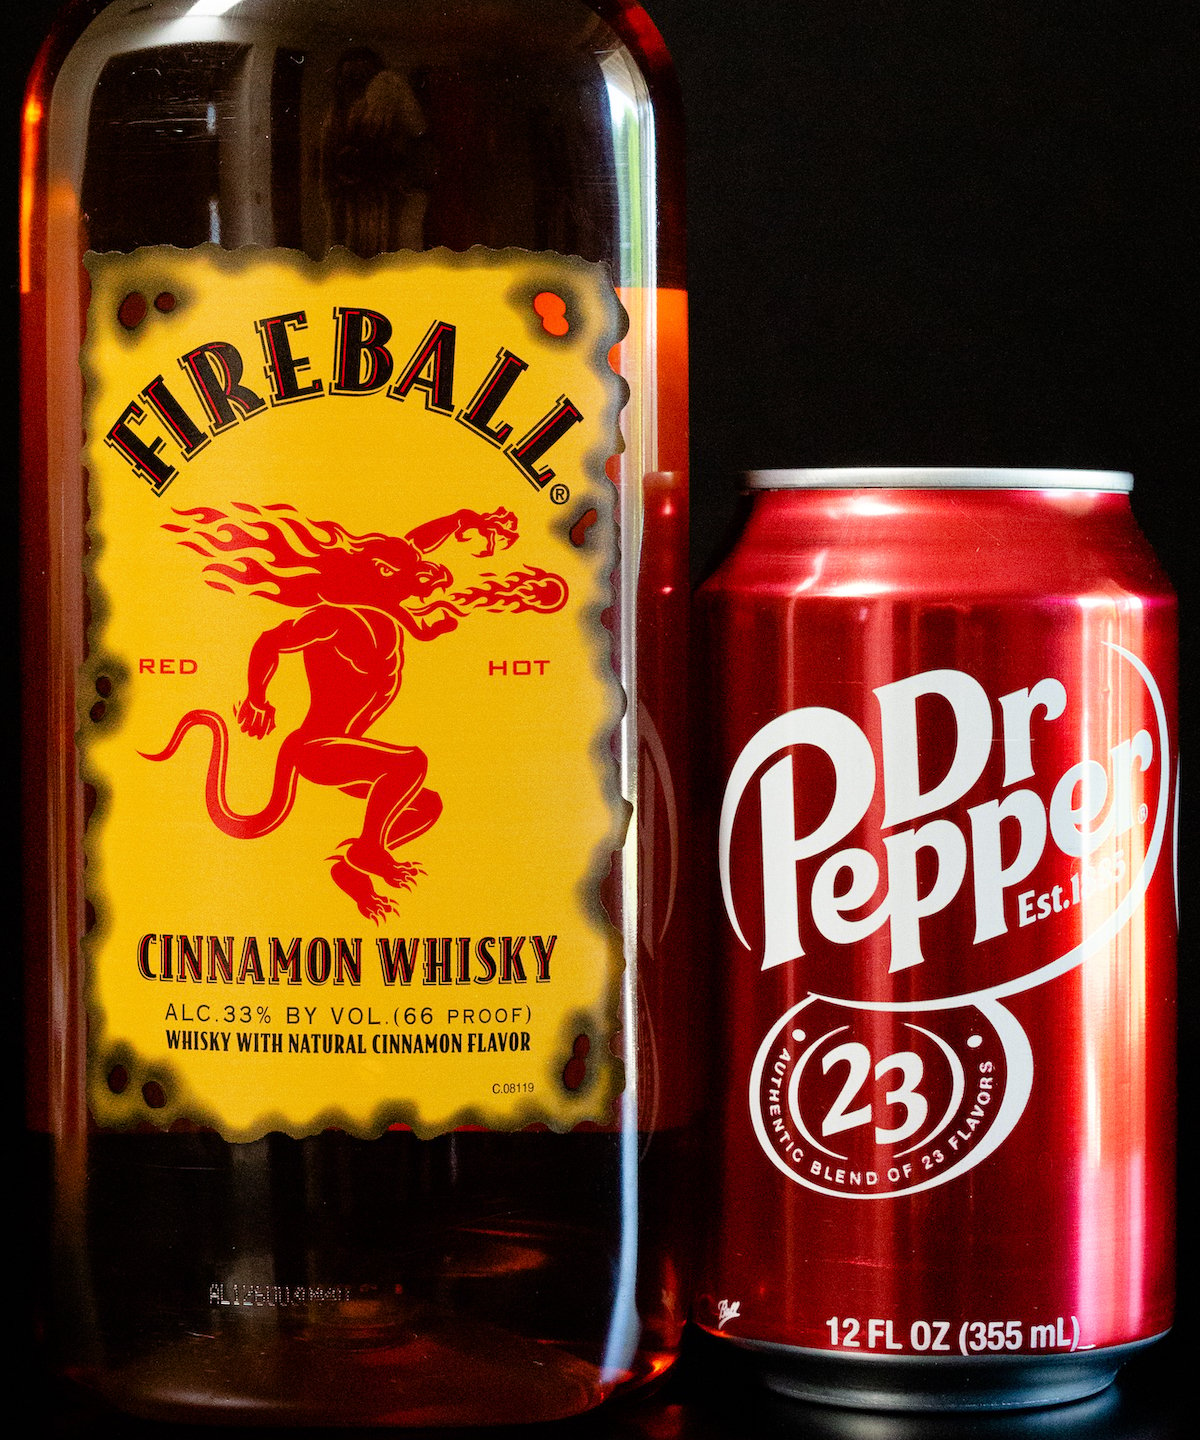 A bottle of Fireball whiskey and a can of Dr. Pepper on a black background.